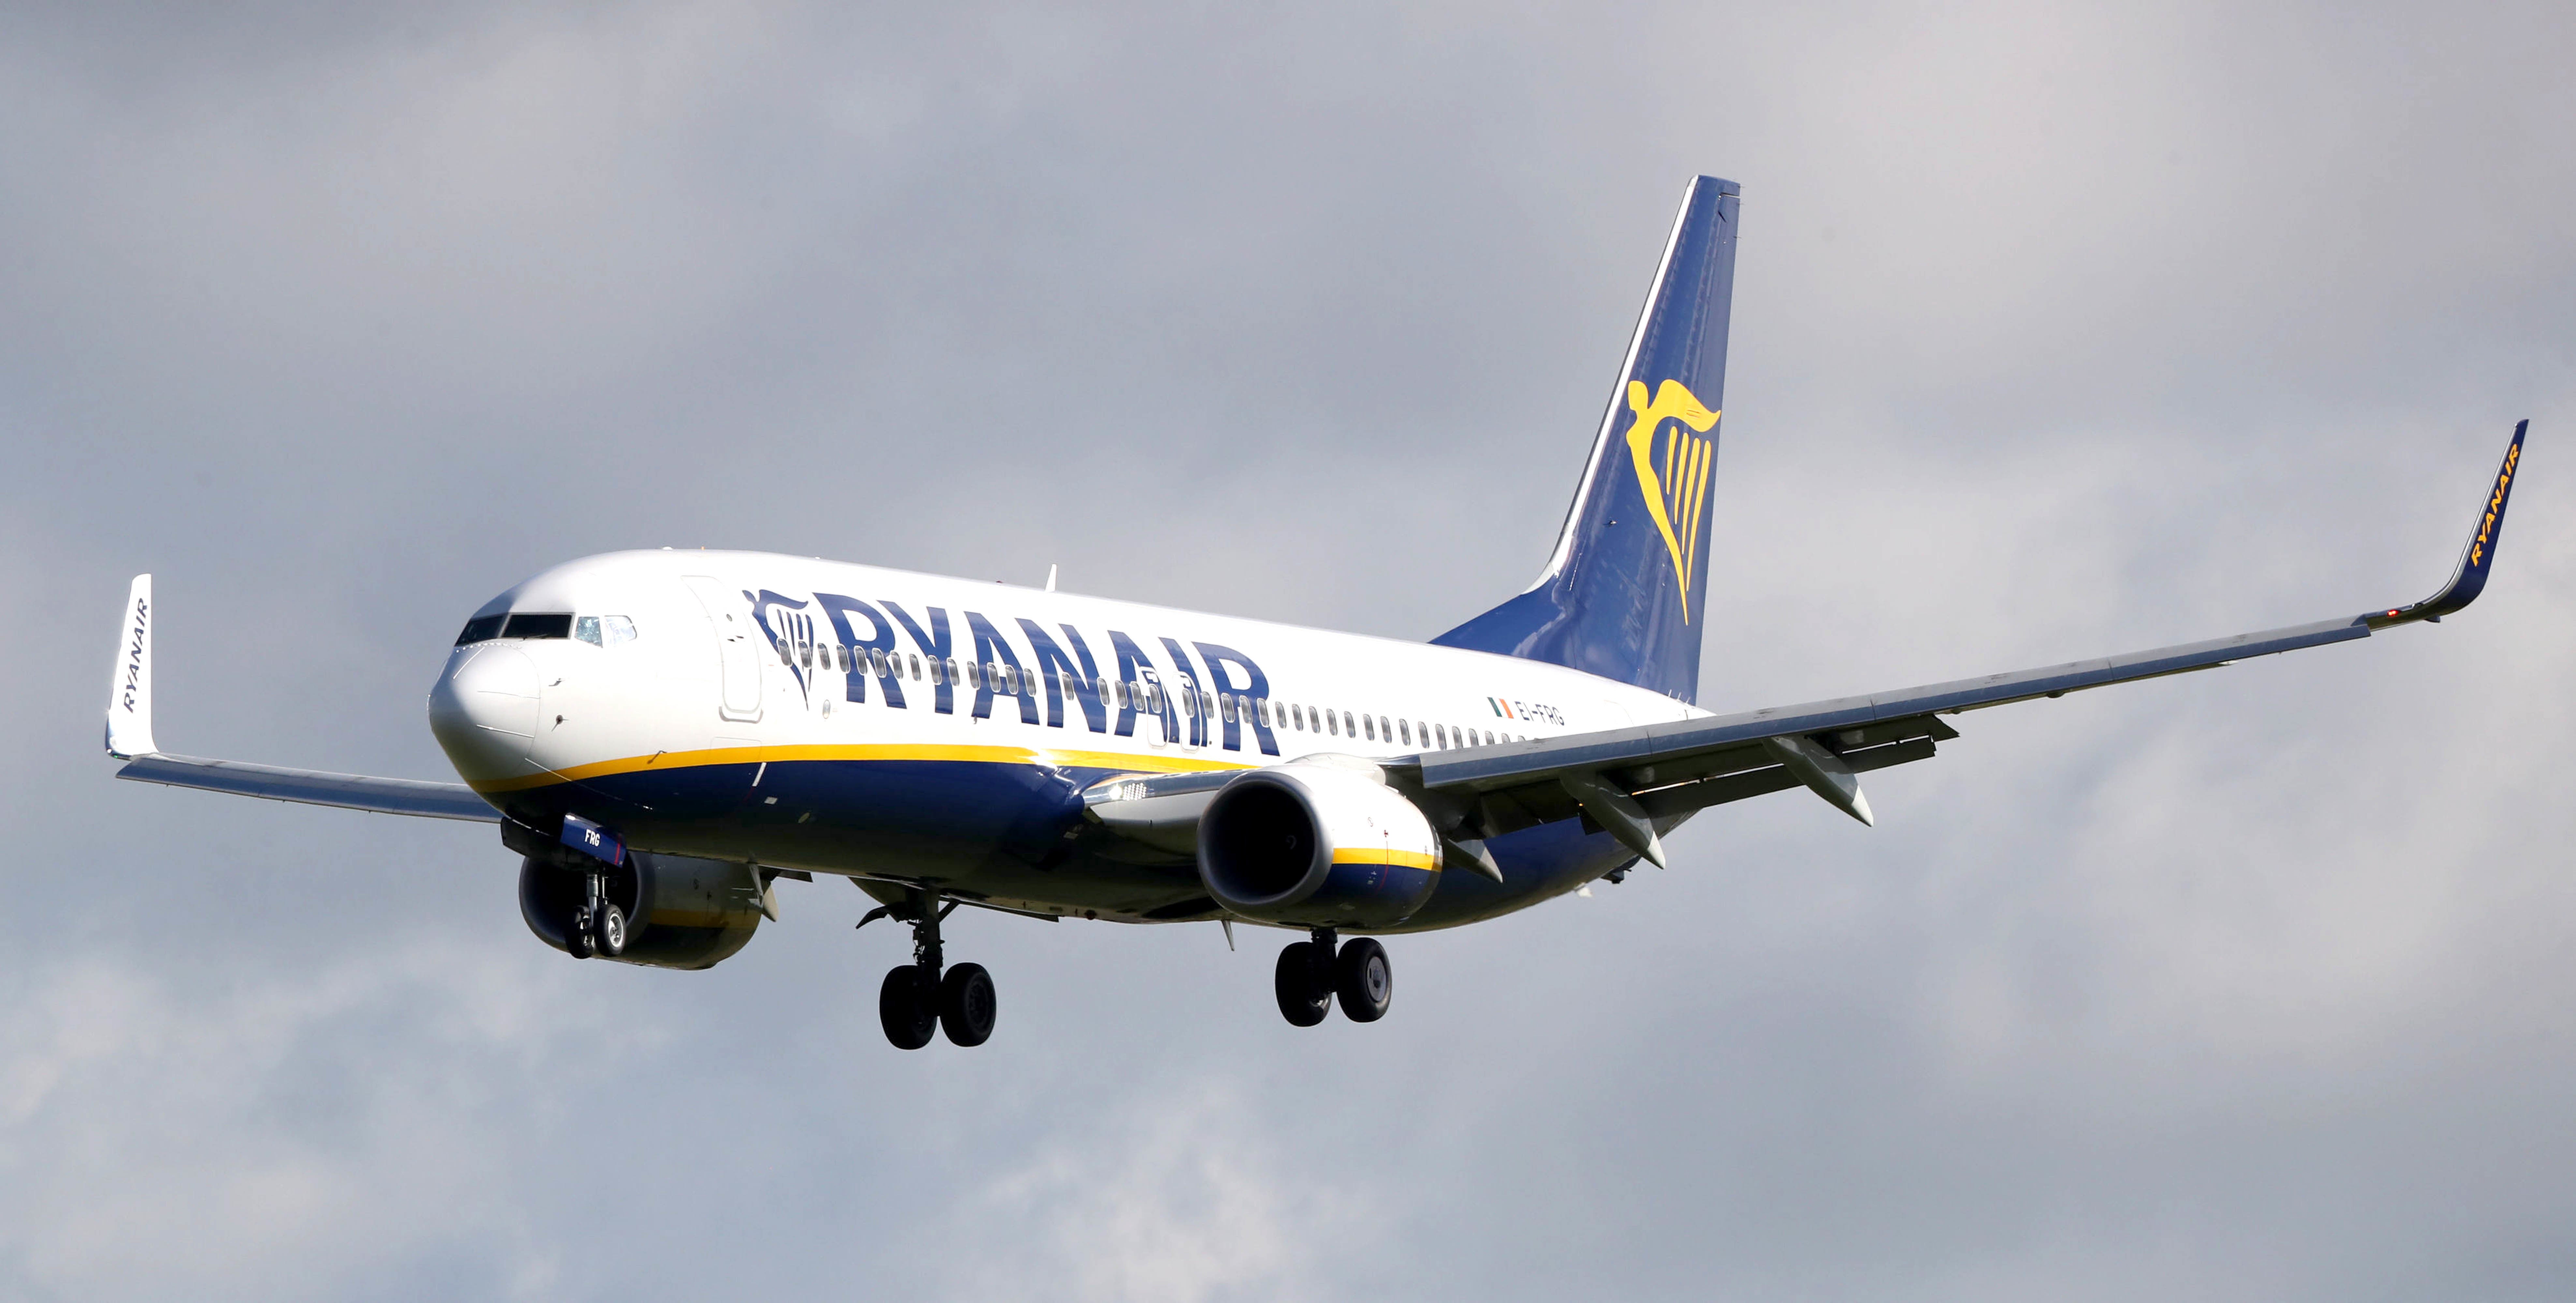 Ryanair has pulled all of its flights from Northern Ireland’s airports